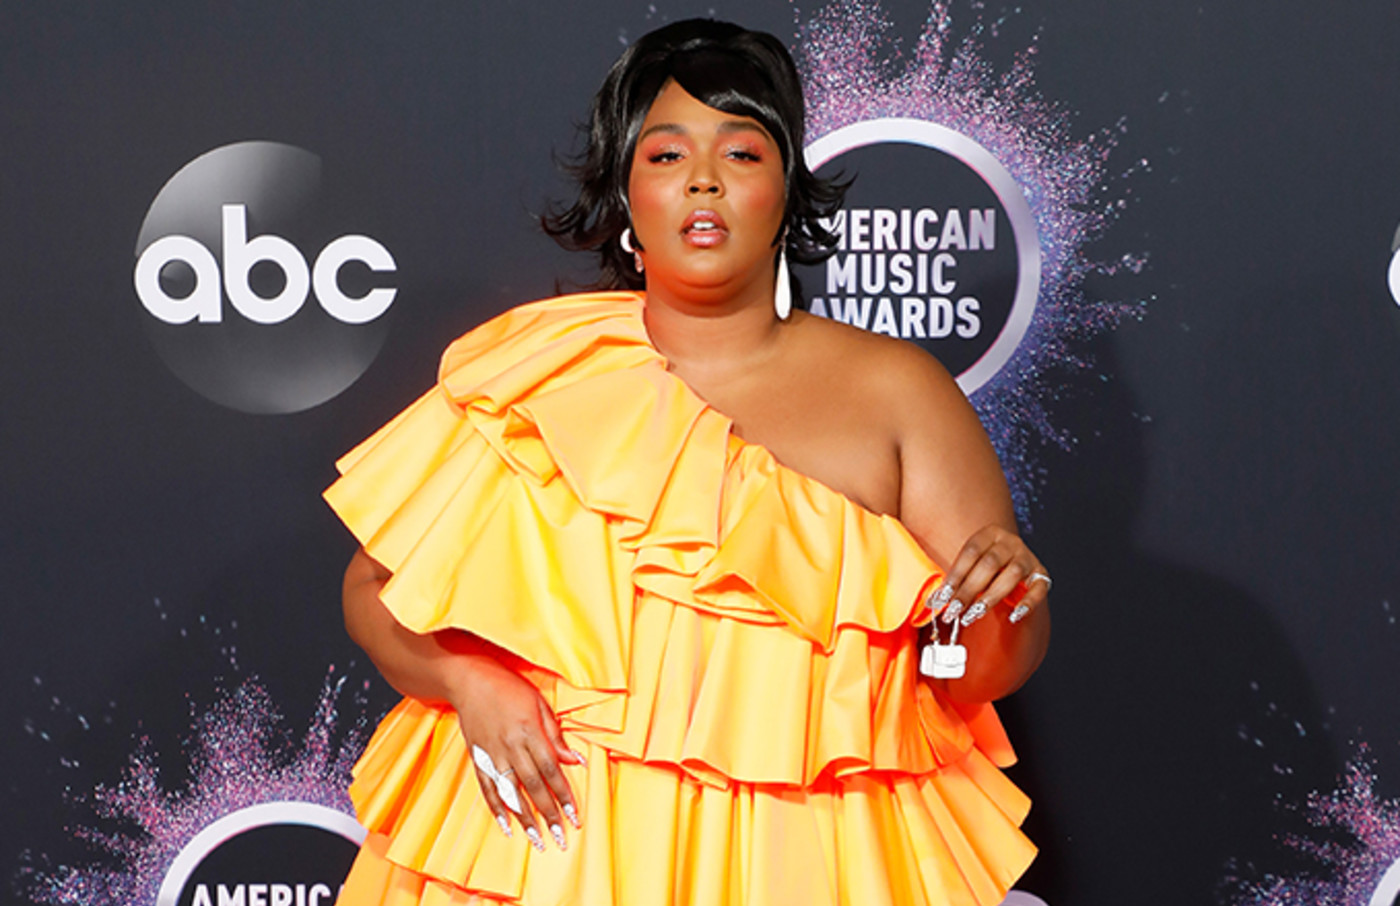 Lizzo Responds to Allegations of Payola for "Water Me" Climbing iTunes Charts | Complex